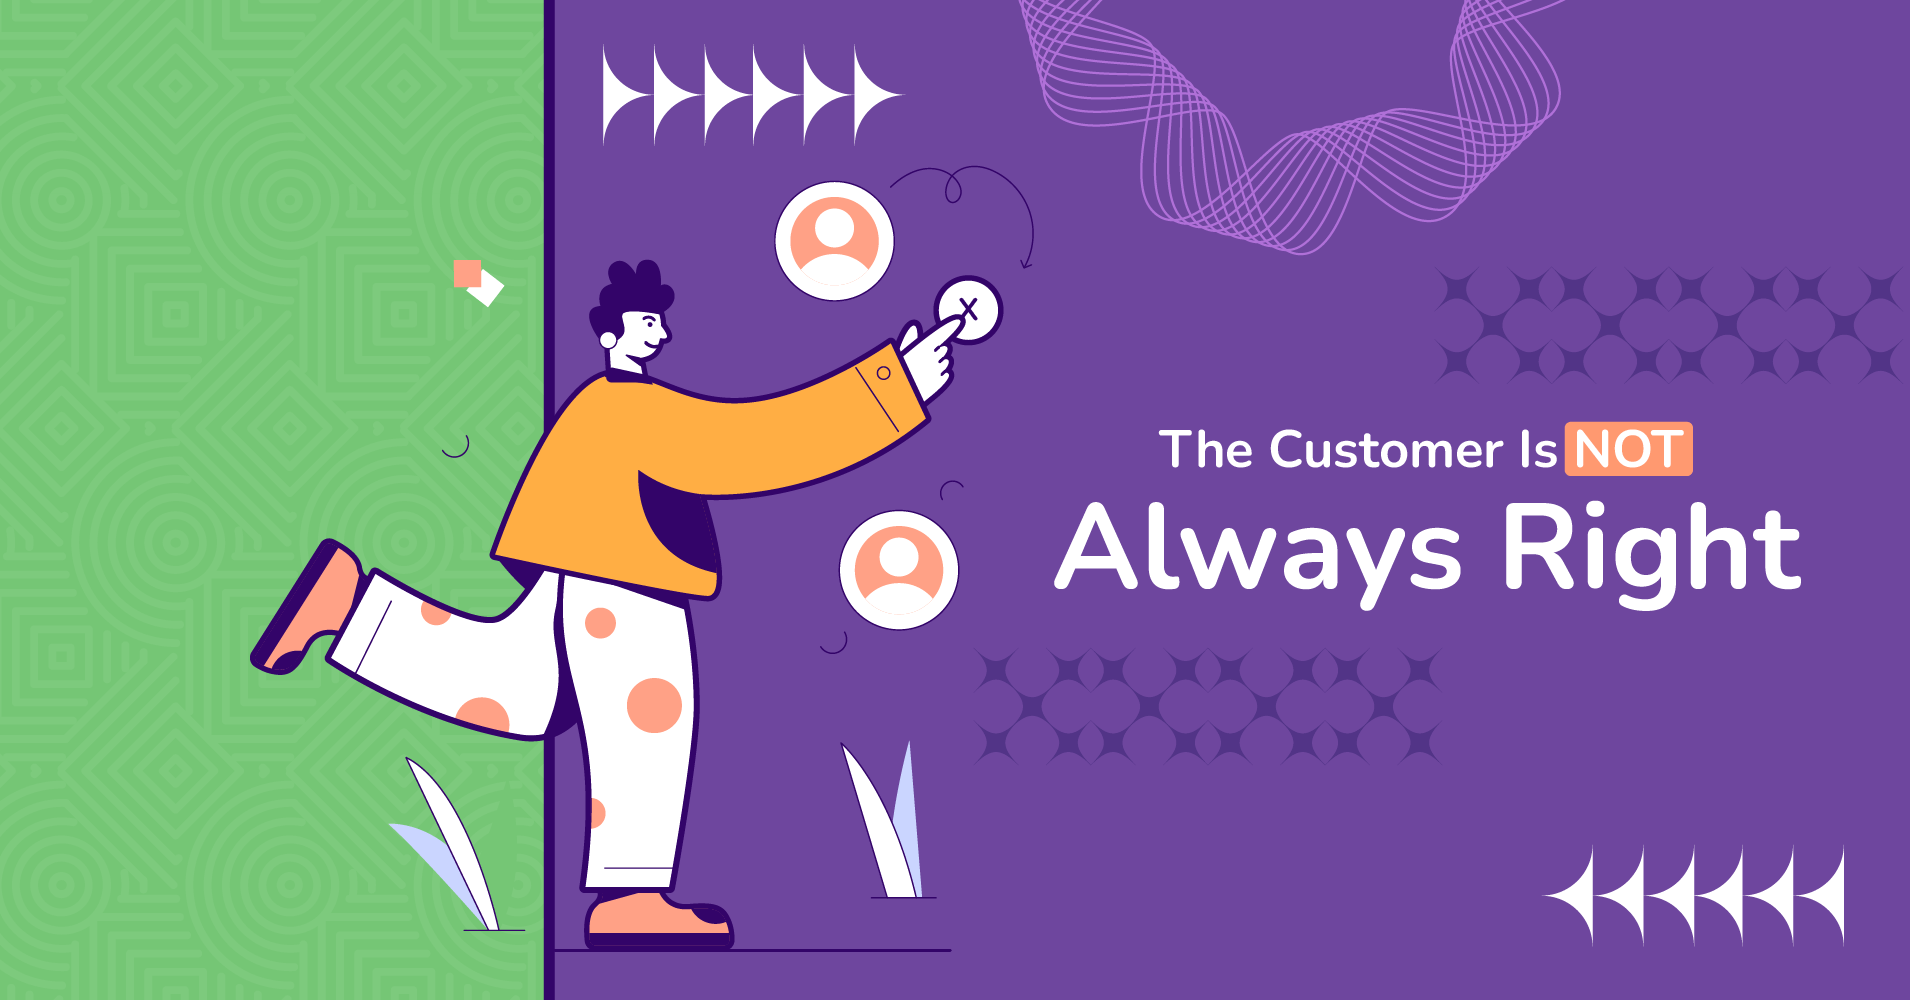 5 Reasons Why The Customer Is Not Always Right